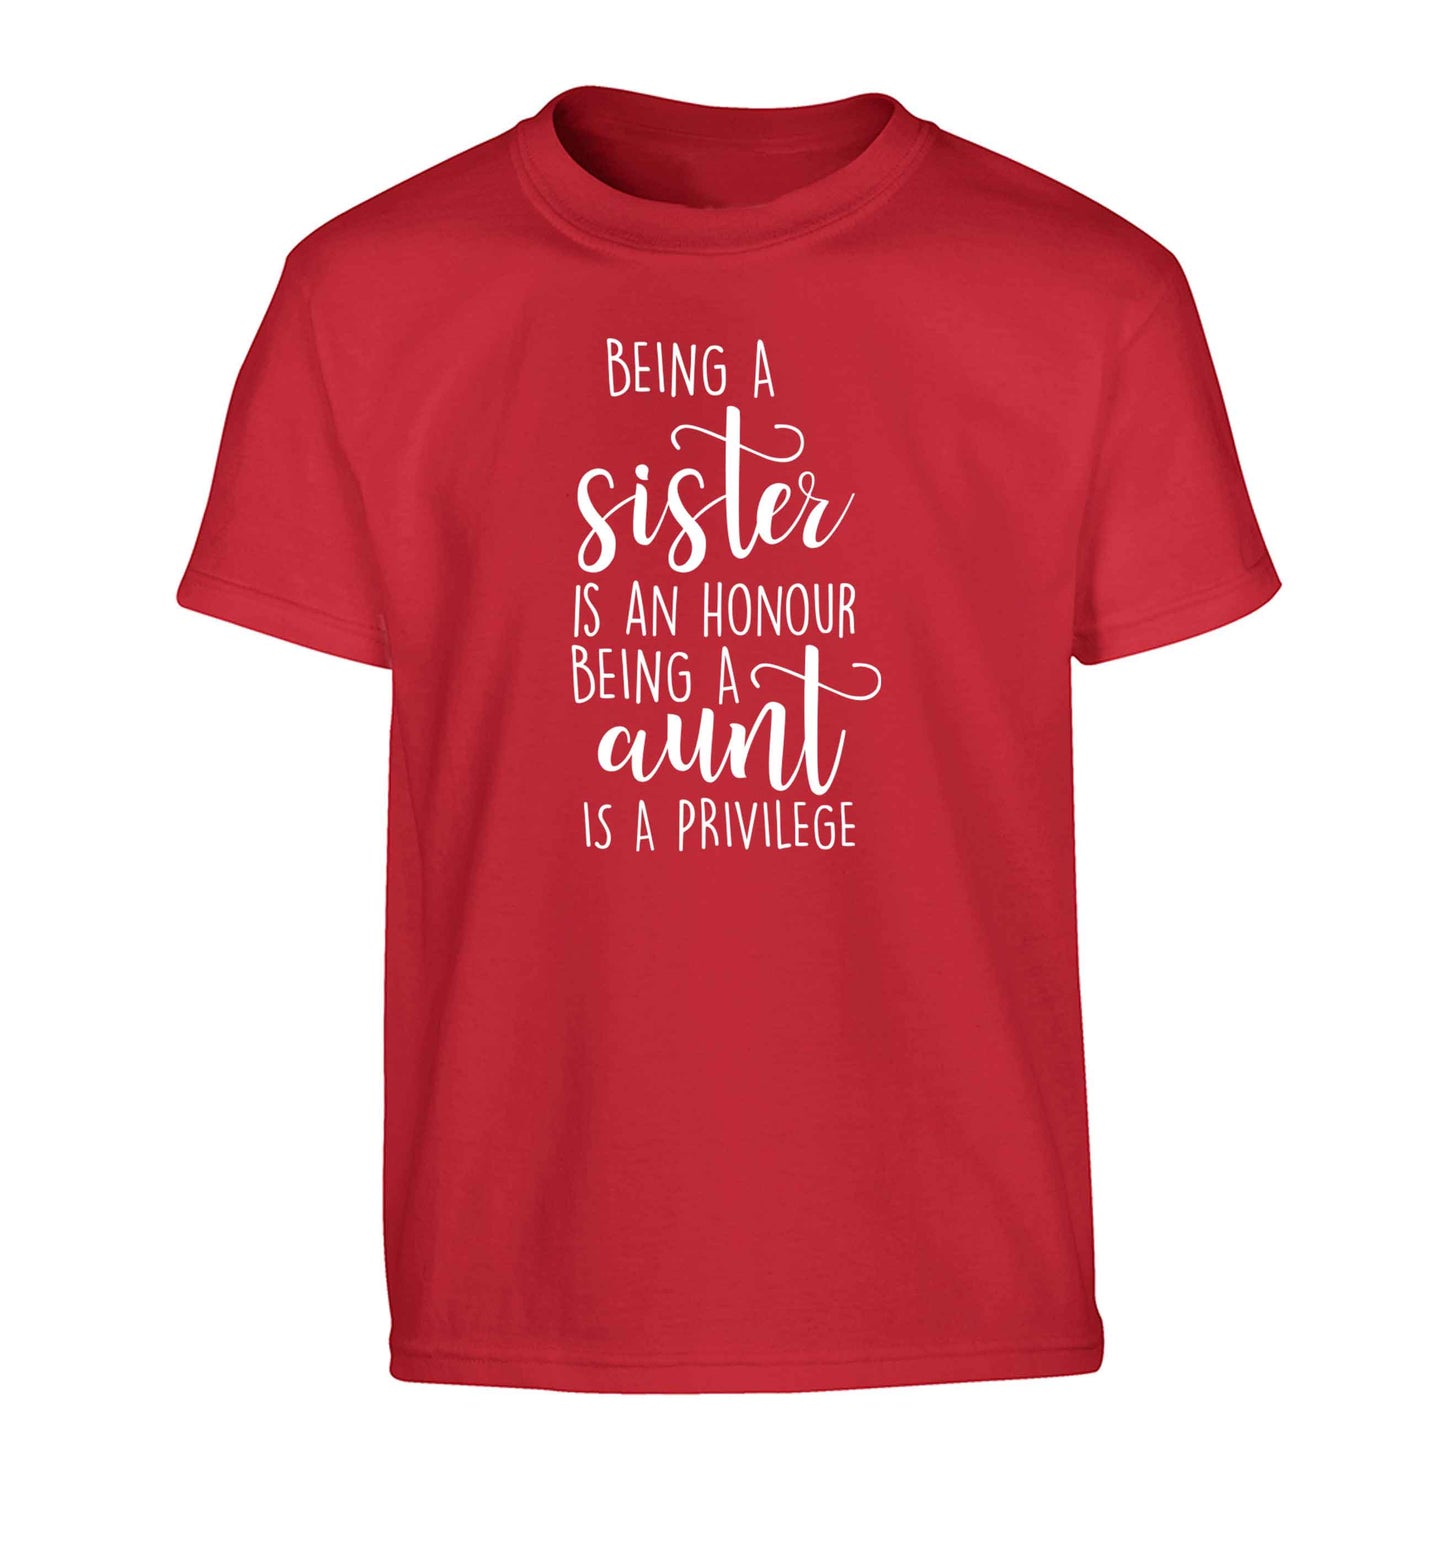 Being a sister is an honour being an auntie is a privilege Children's red Tshirt 12-13 Years